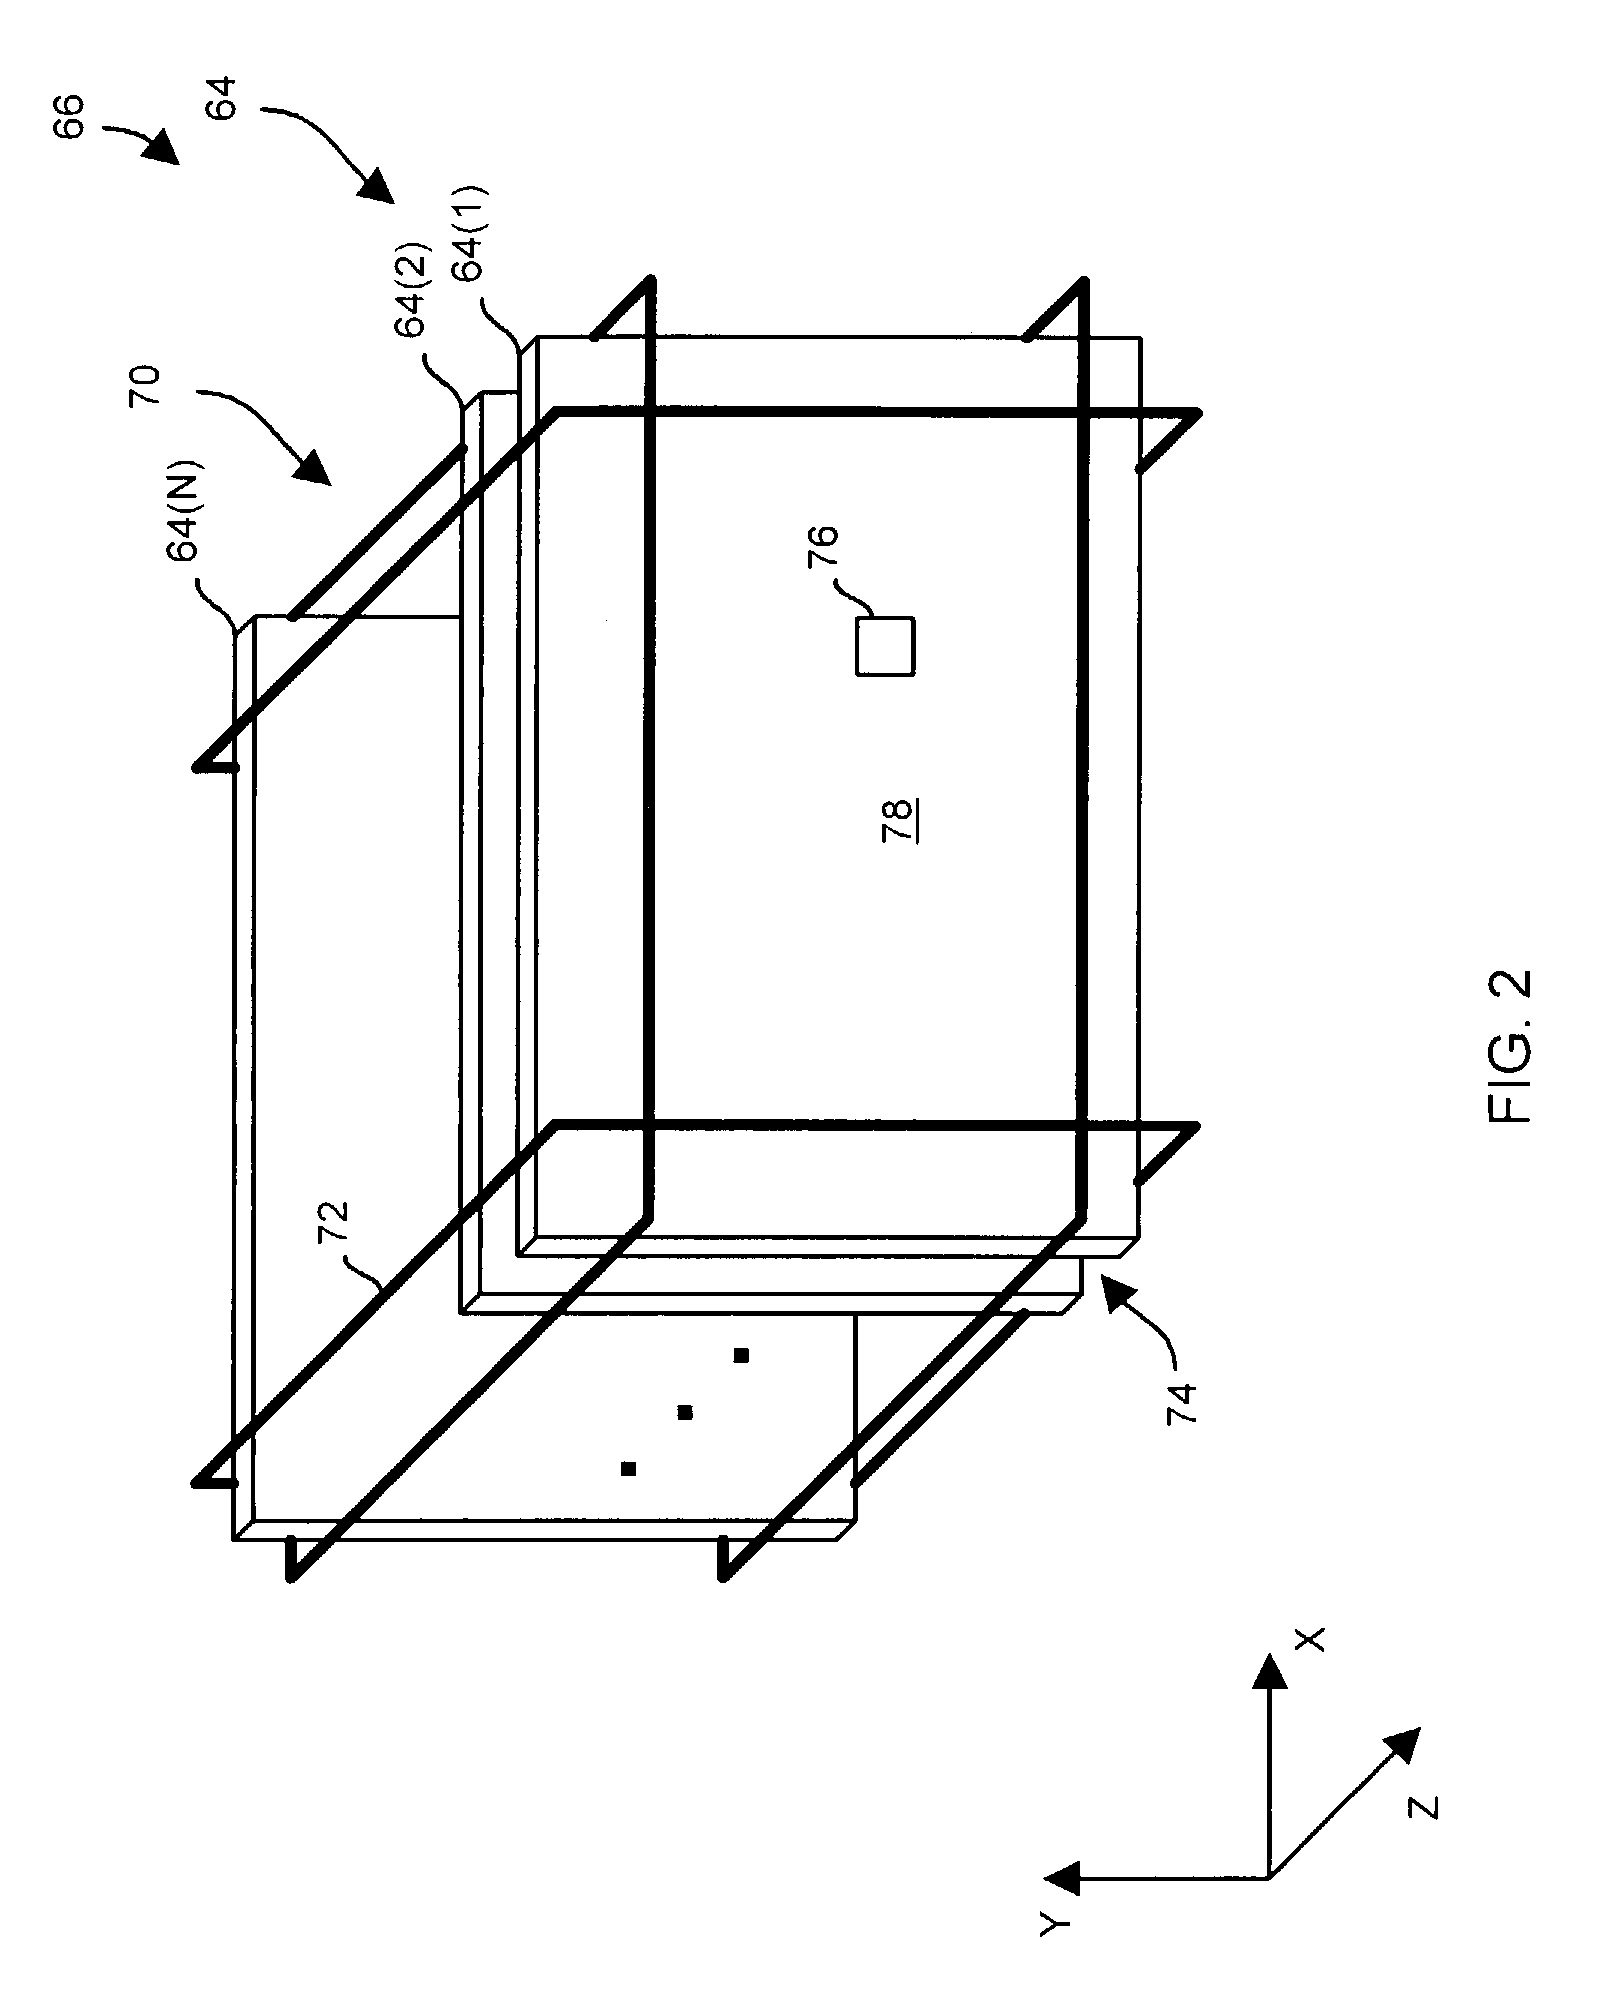 Systems and methods for processing a set of circuit boards